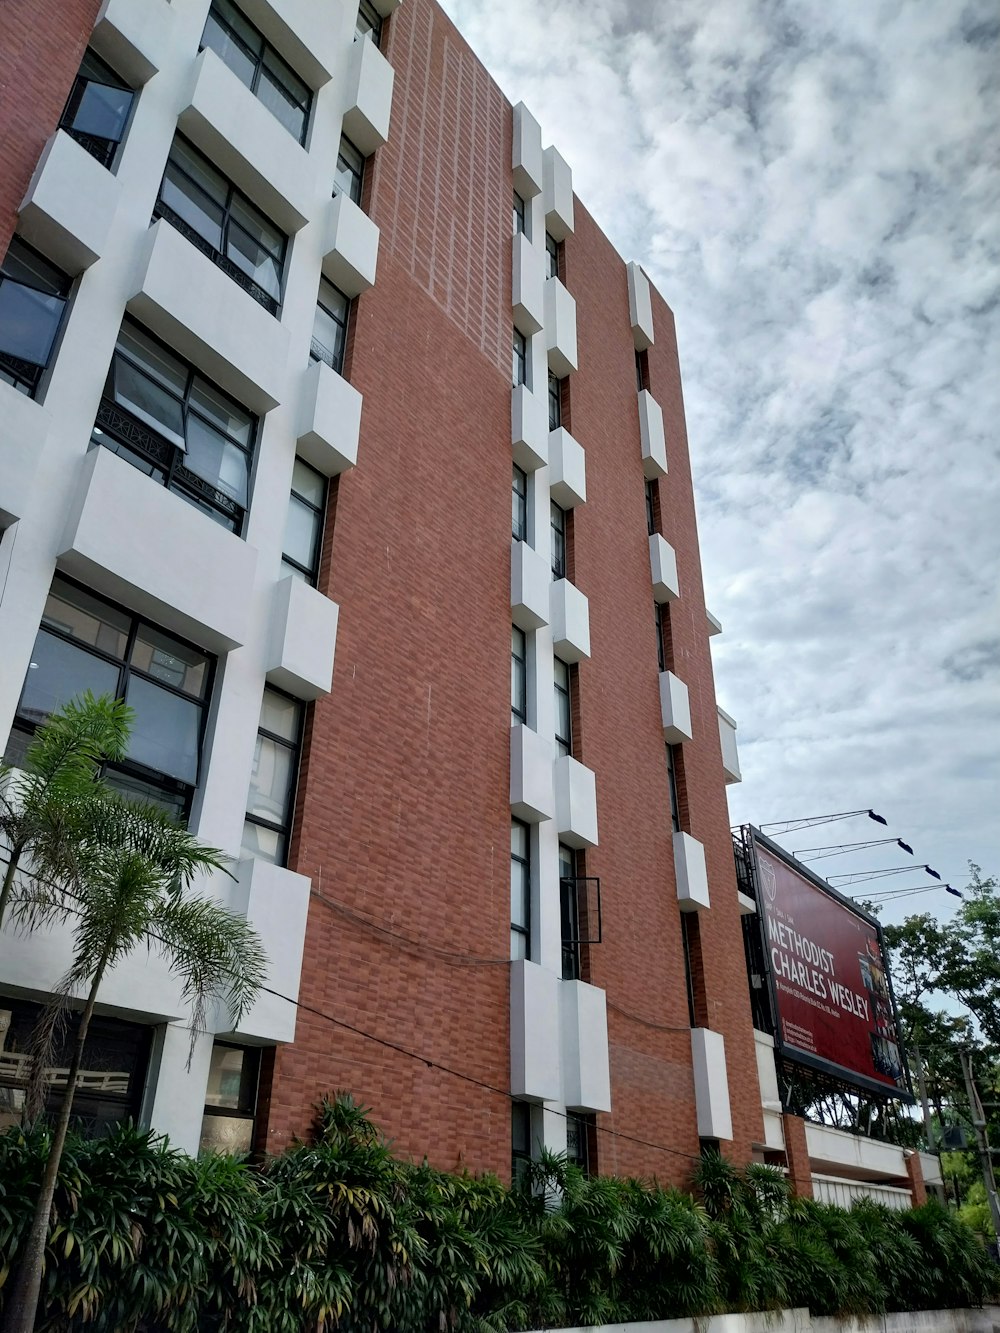 a tall building with a sign on it